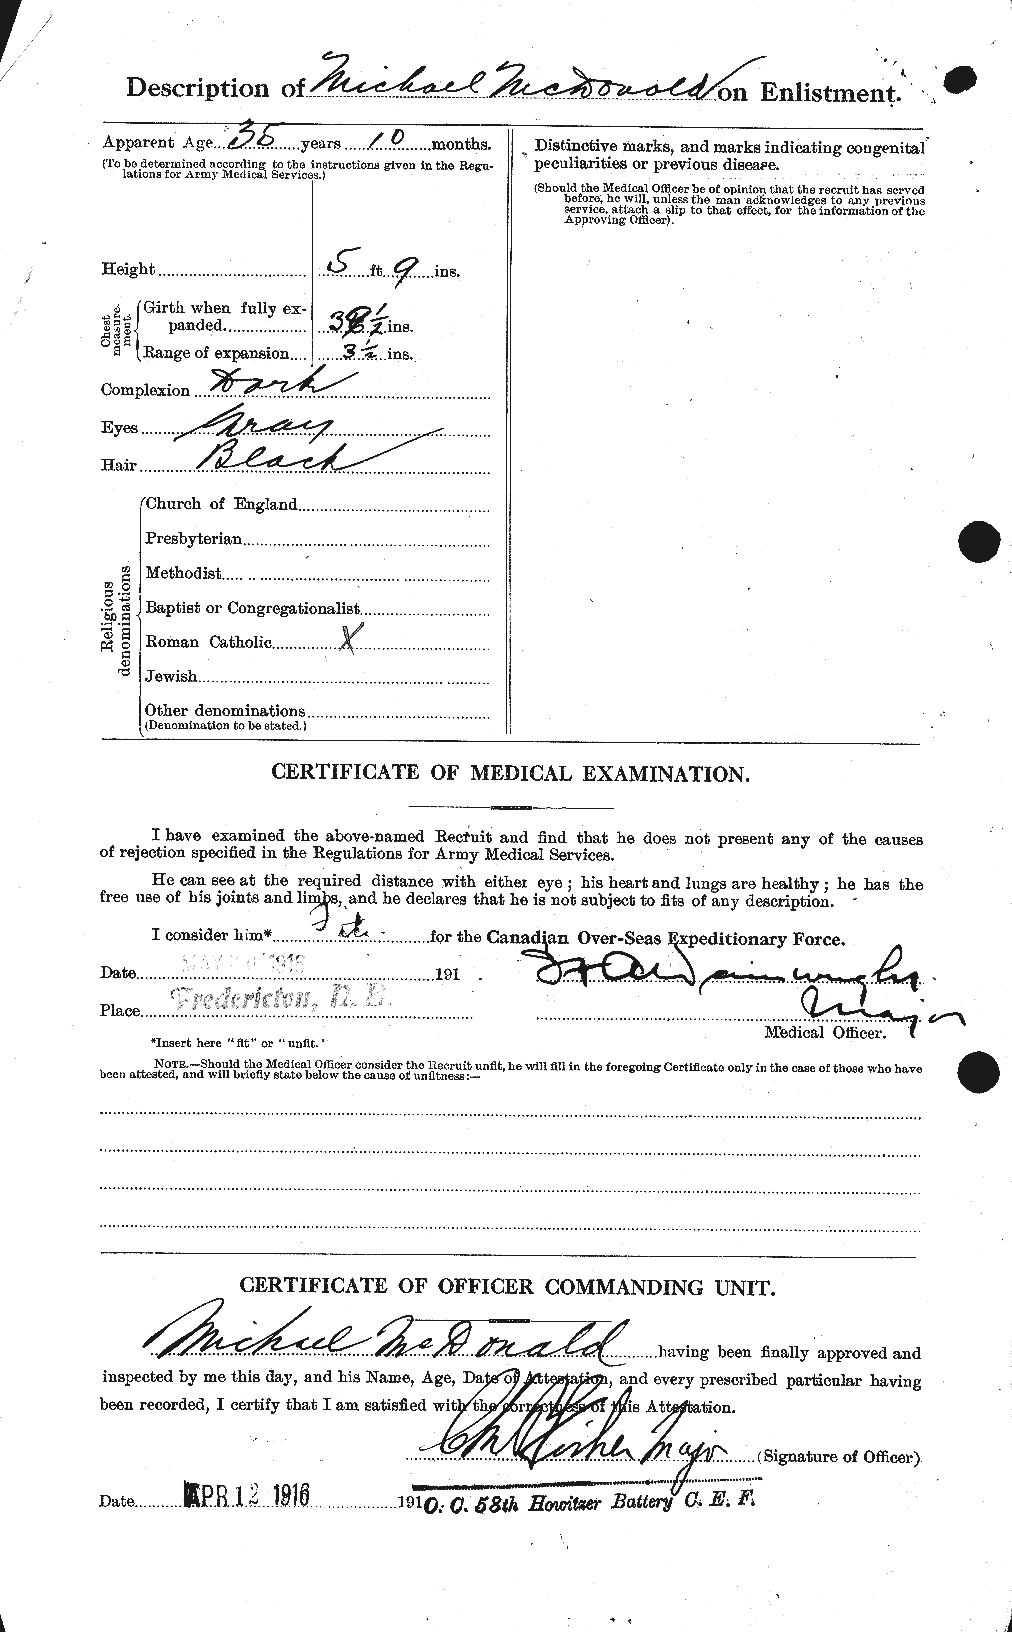 Personnel Records of the First World War - CEF 524622b